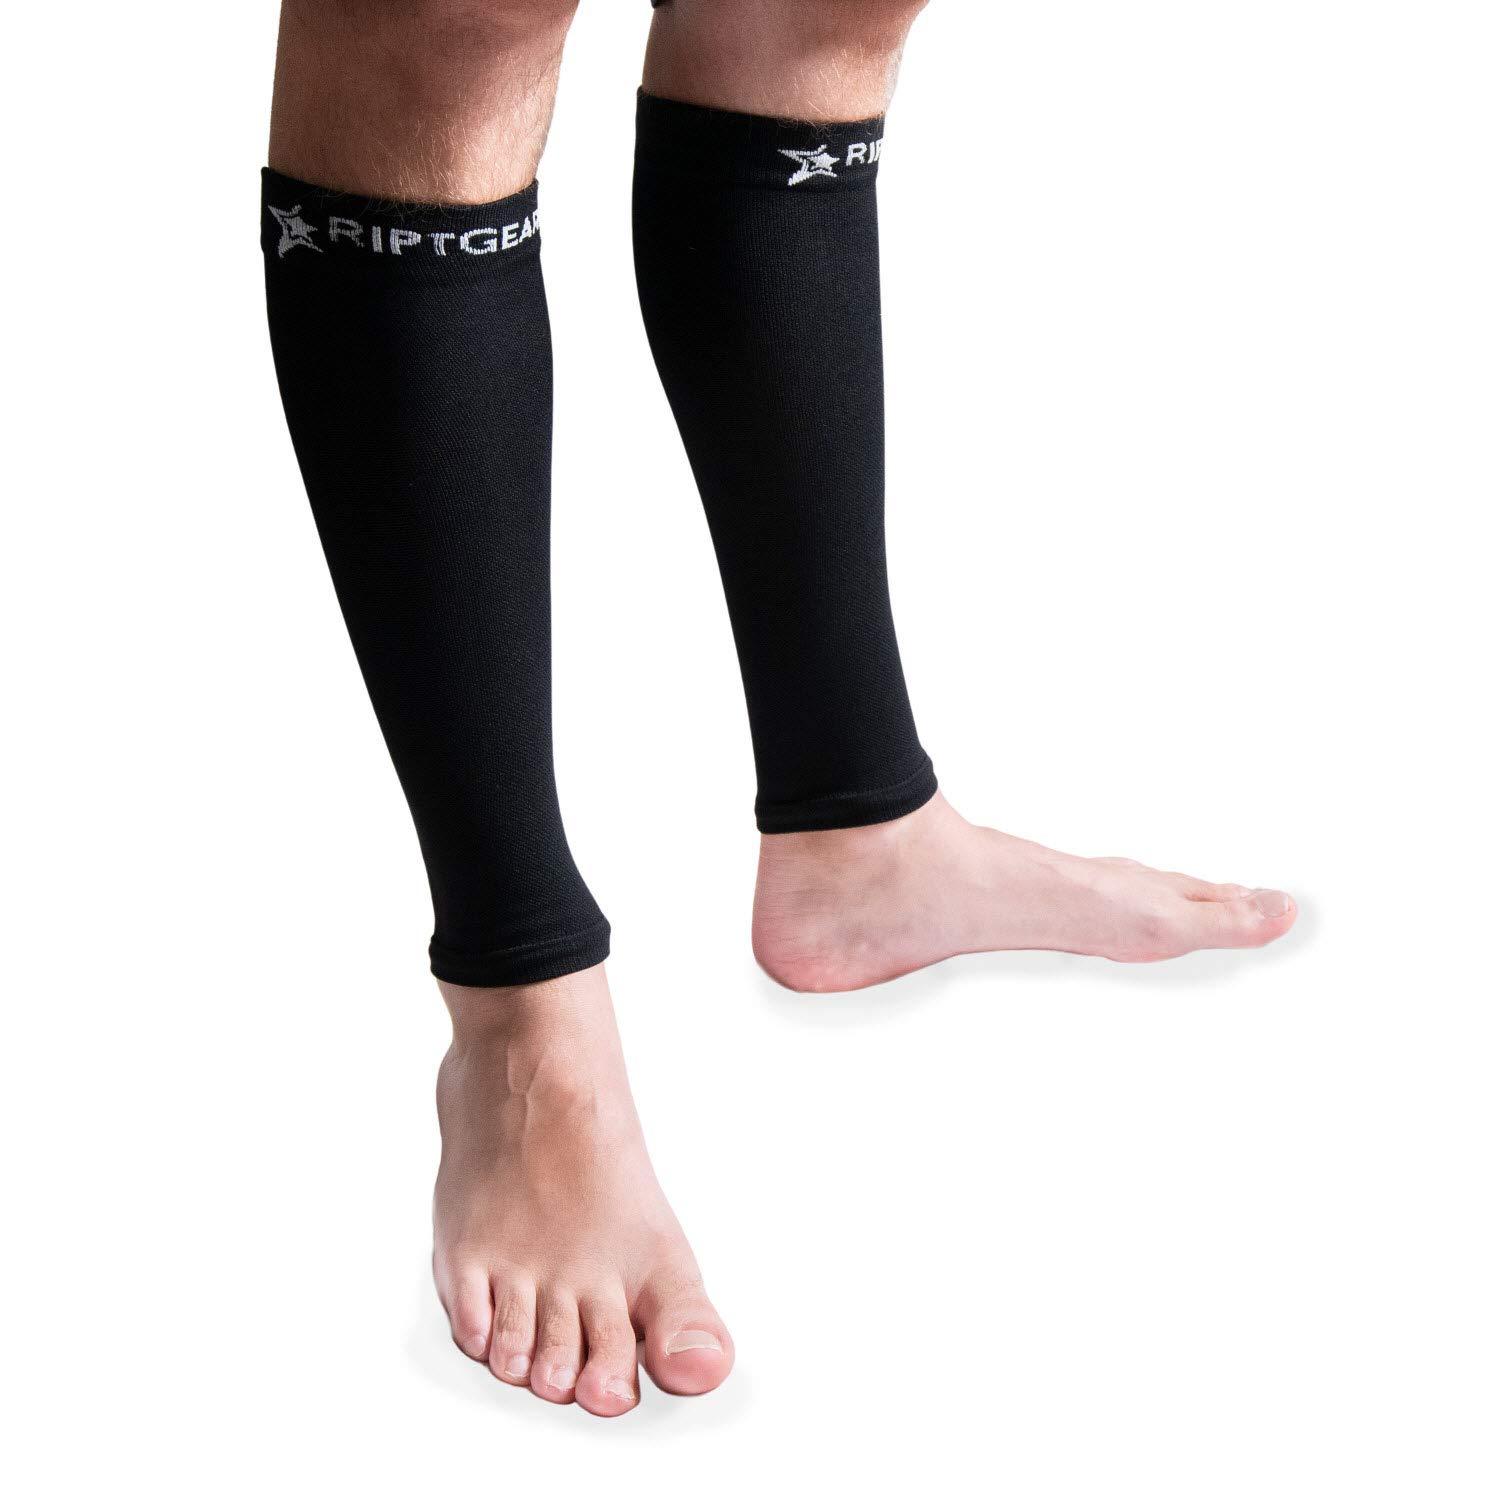 RiptGear Calf Compression Sleeves for Women and Men Graduated Compression  Leg and Calf Support Footless Compression Socks Tights Leggings - Medium